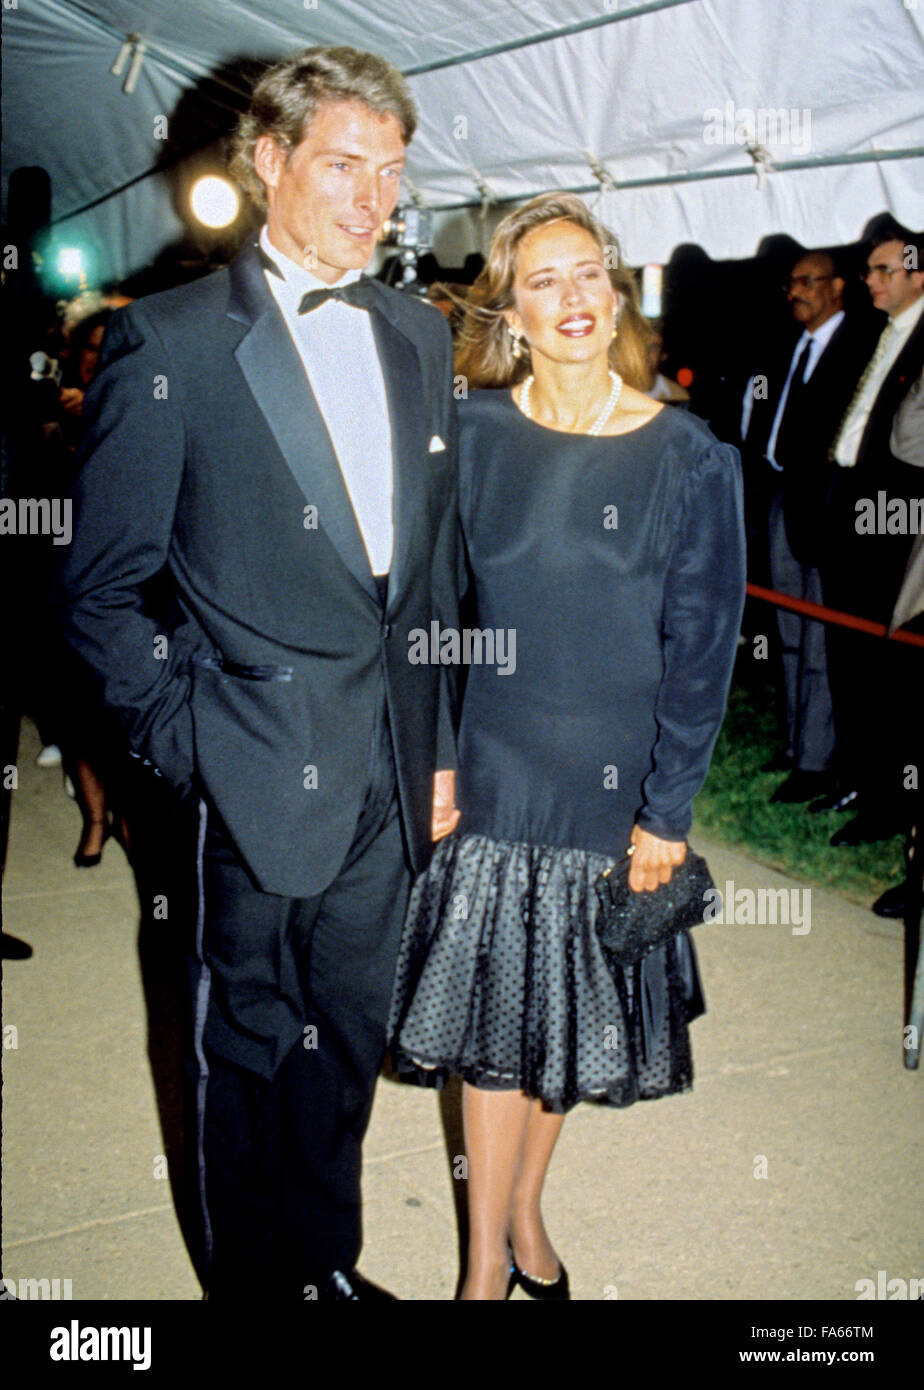 Actor Christopher Reeve and his girlfriend Dana Morosini arrive for the American Film Institute (AFI) Gala in Washington, DC on September 26, 1989. Credit: Ron Sachs/CNP - NO WIRE SERVICE - Stock Photo